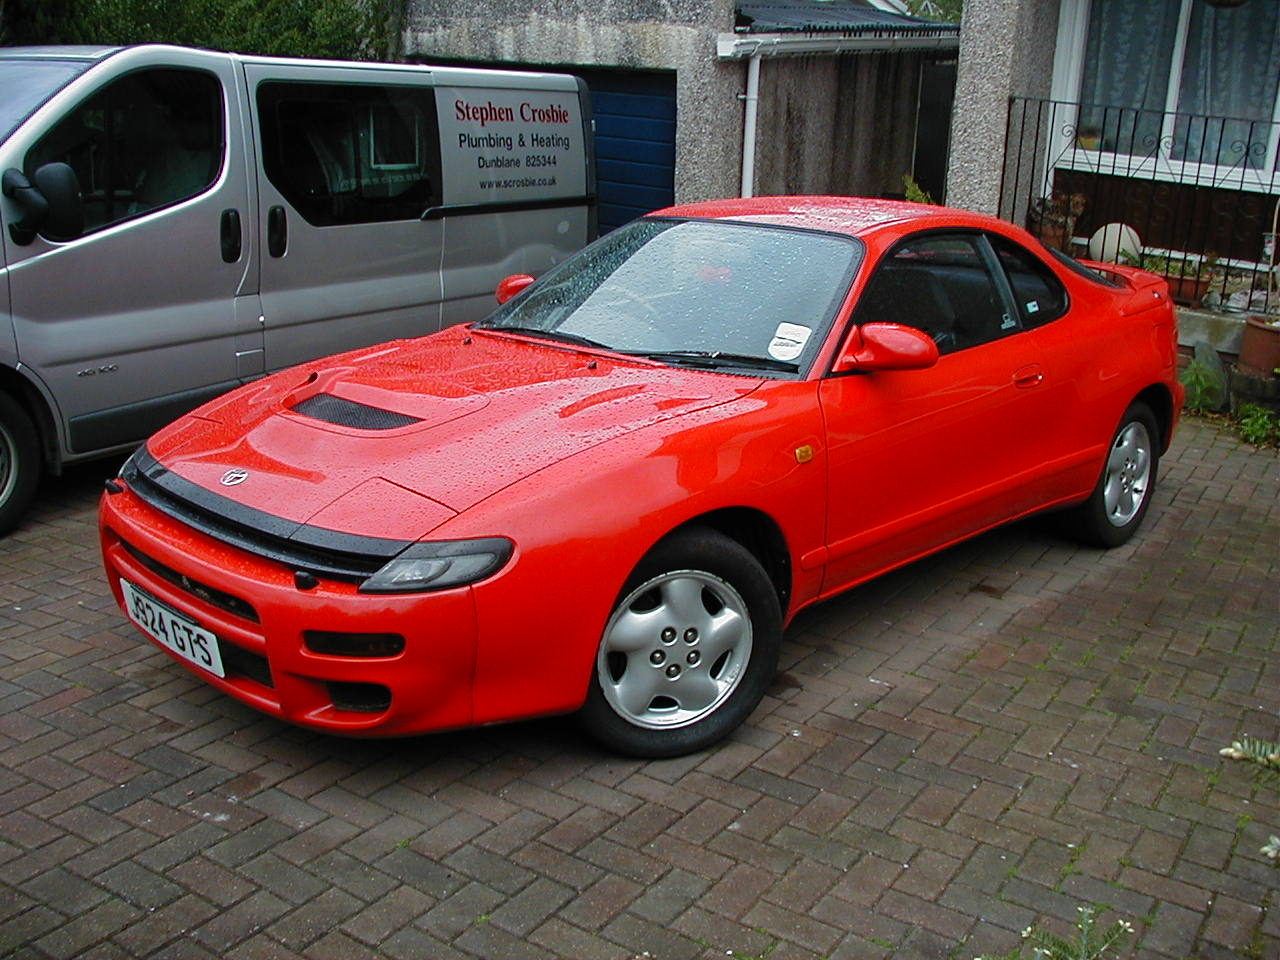 Toyota Celica 23134 Hd Wallpapers in Cars   Imagescicom